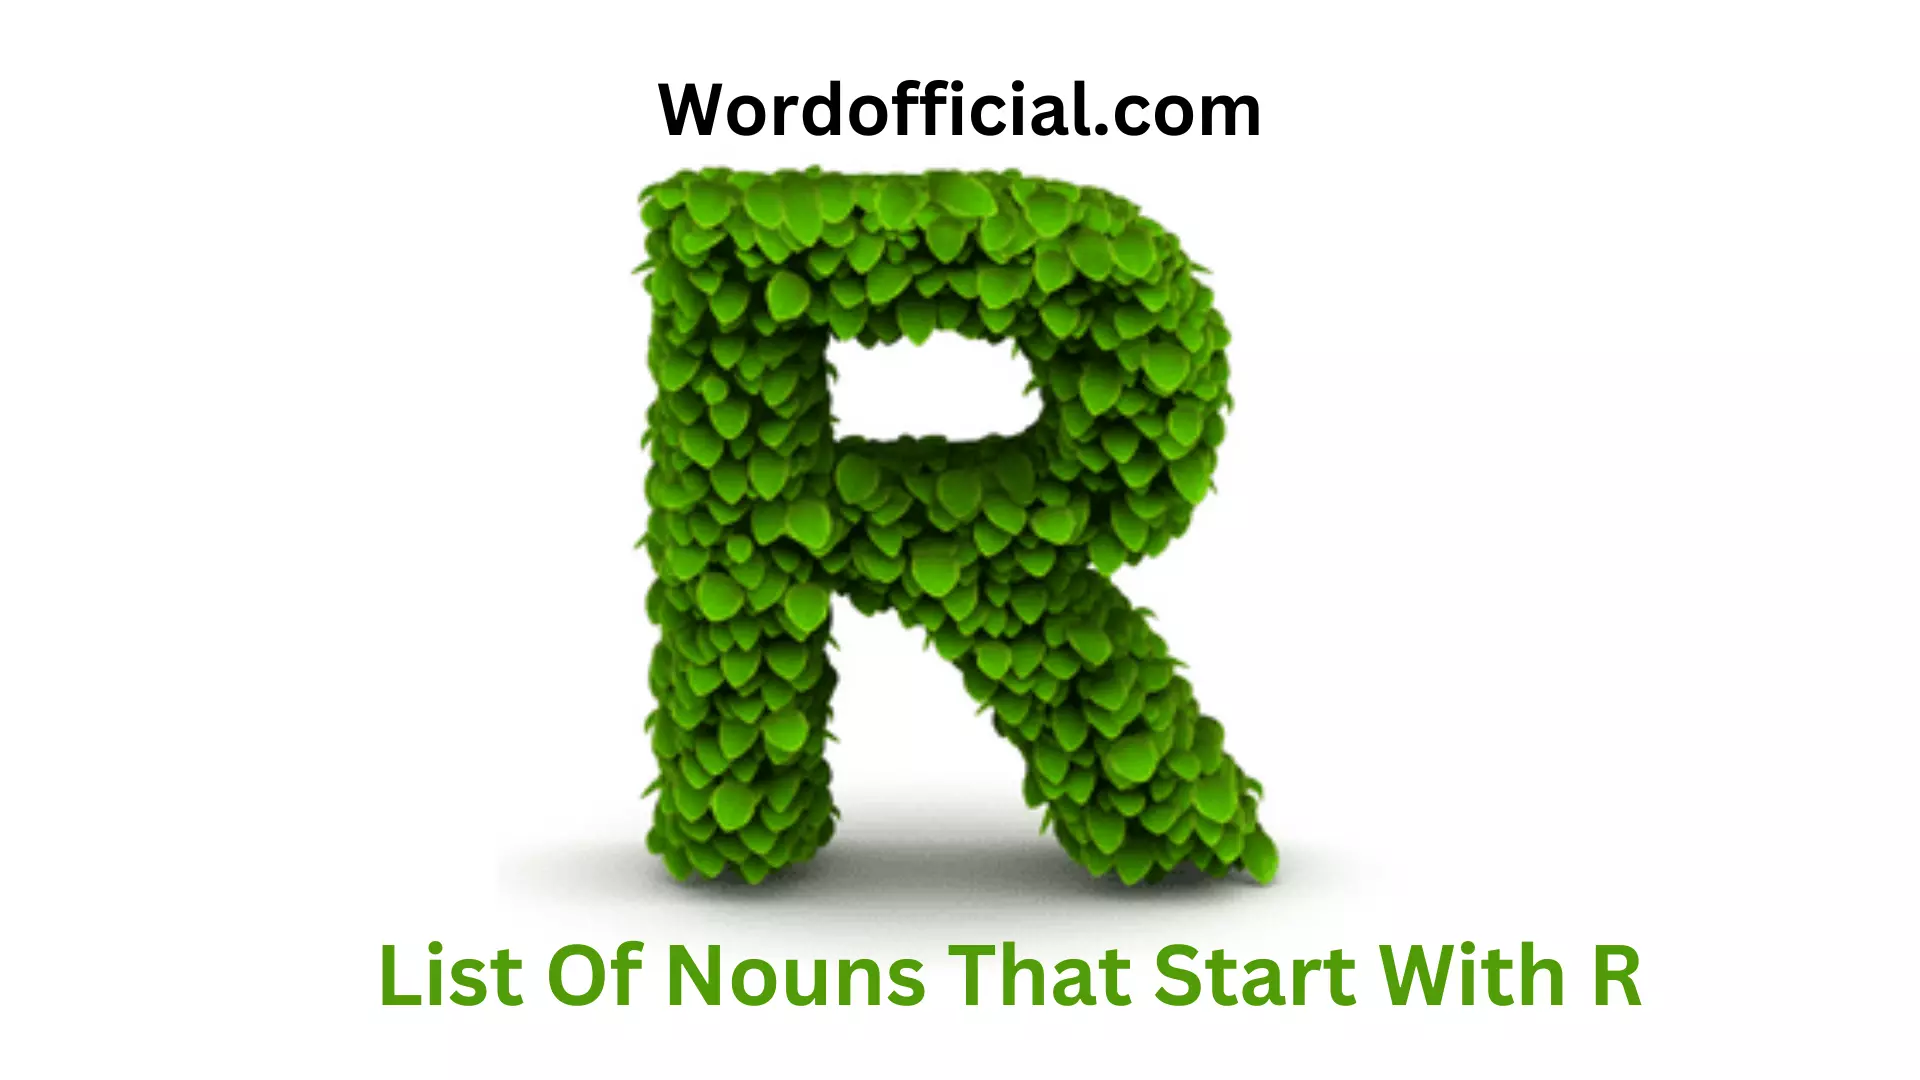 List Of Nouns That Start With R